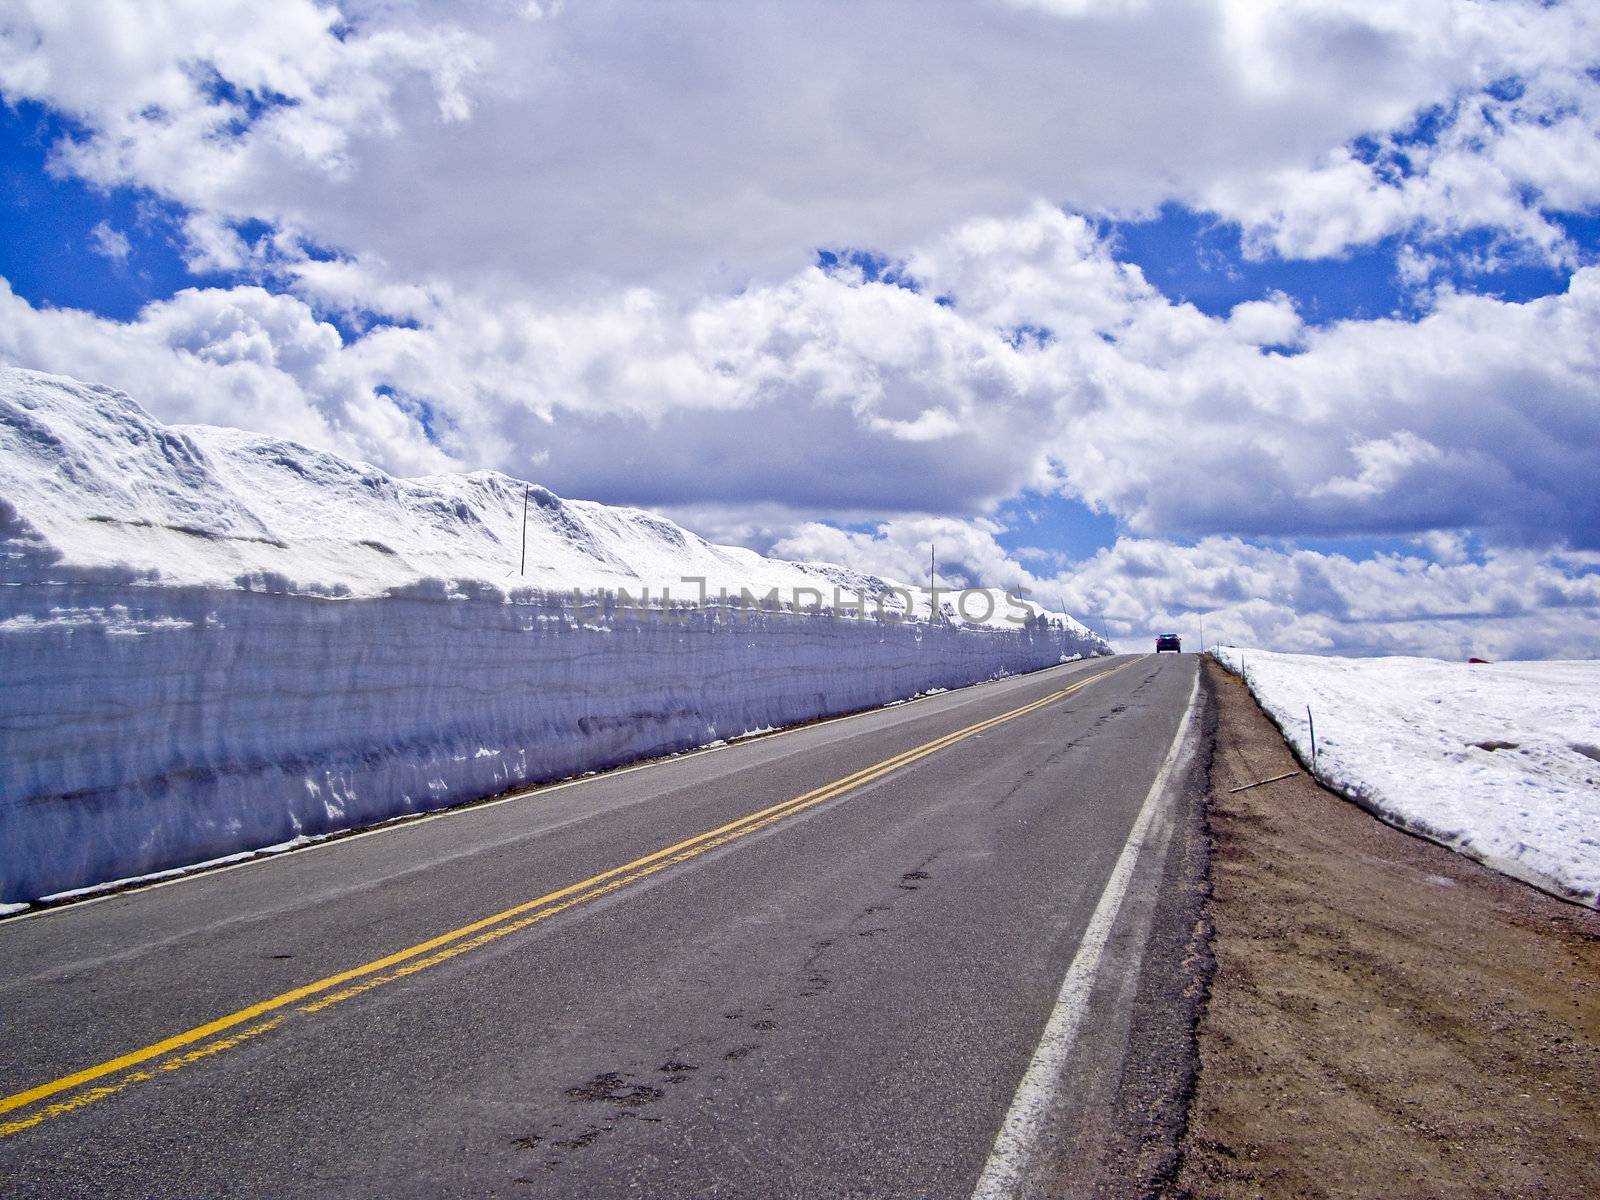 Beartooth Highway with massive snowbanks in Spring